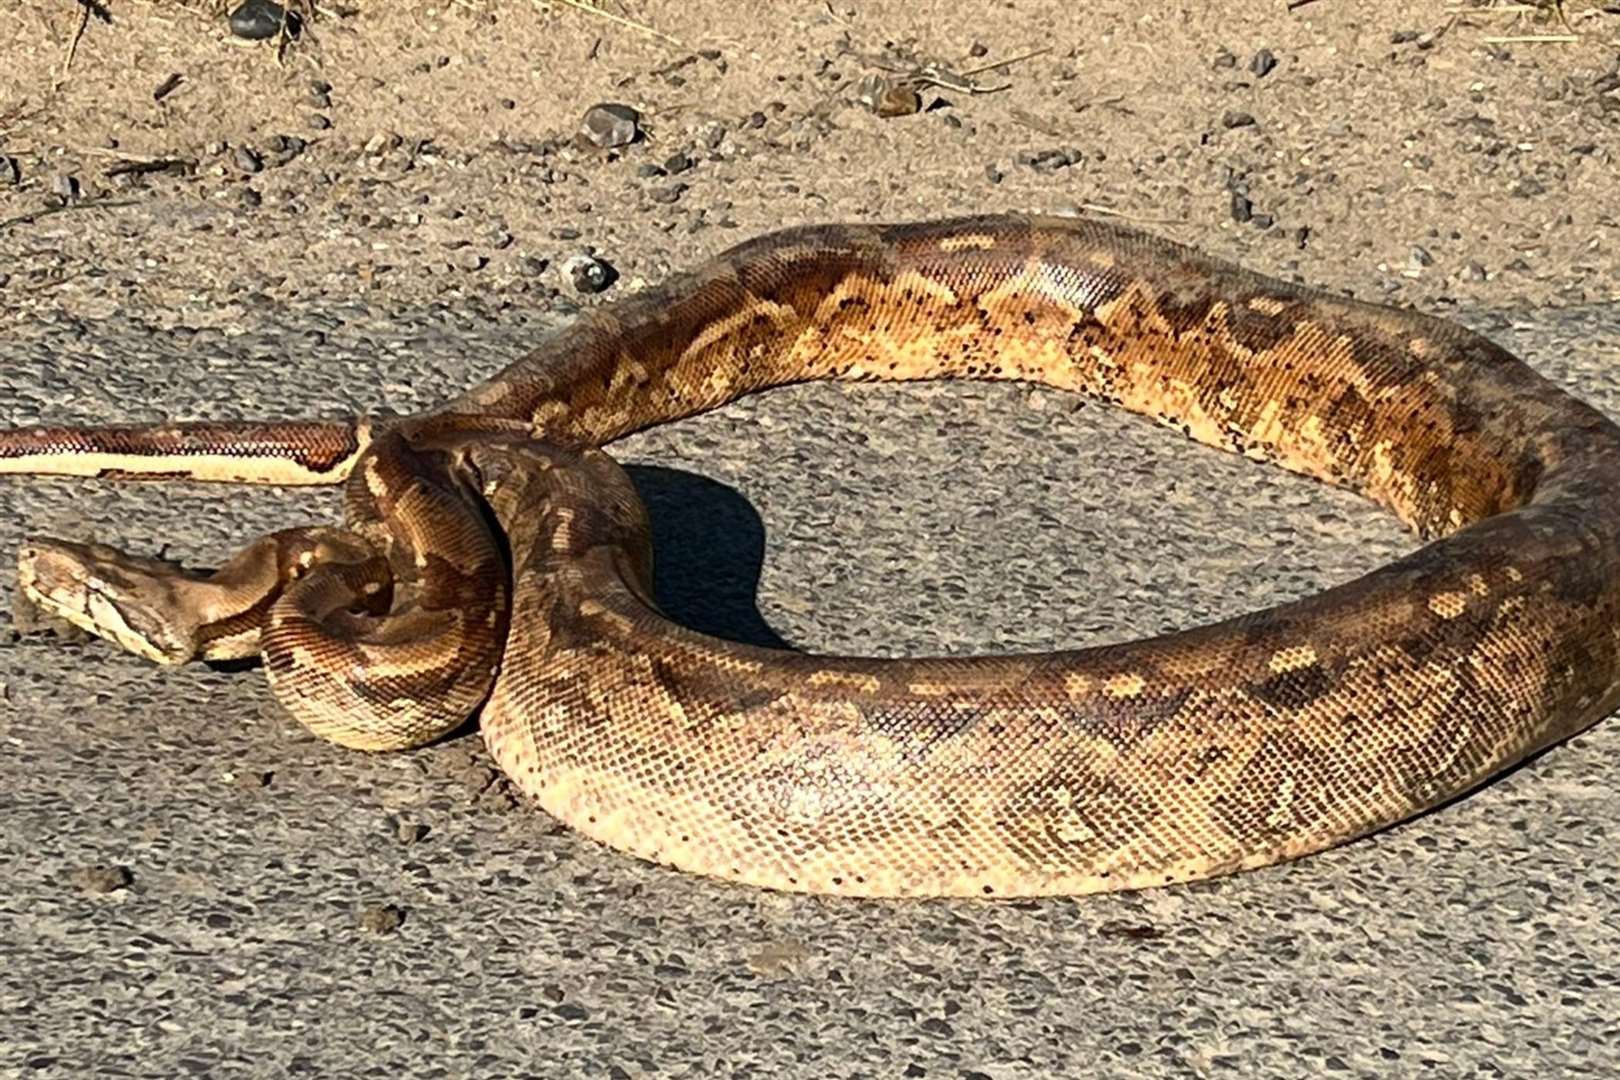 The python was soaking up the sun in Reculver